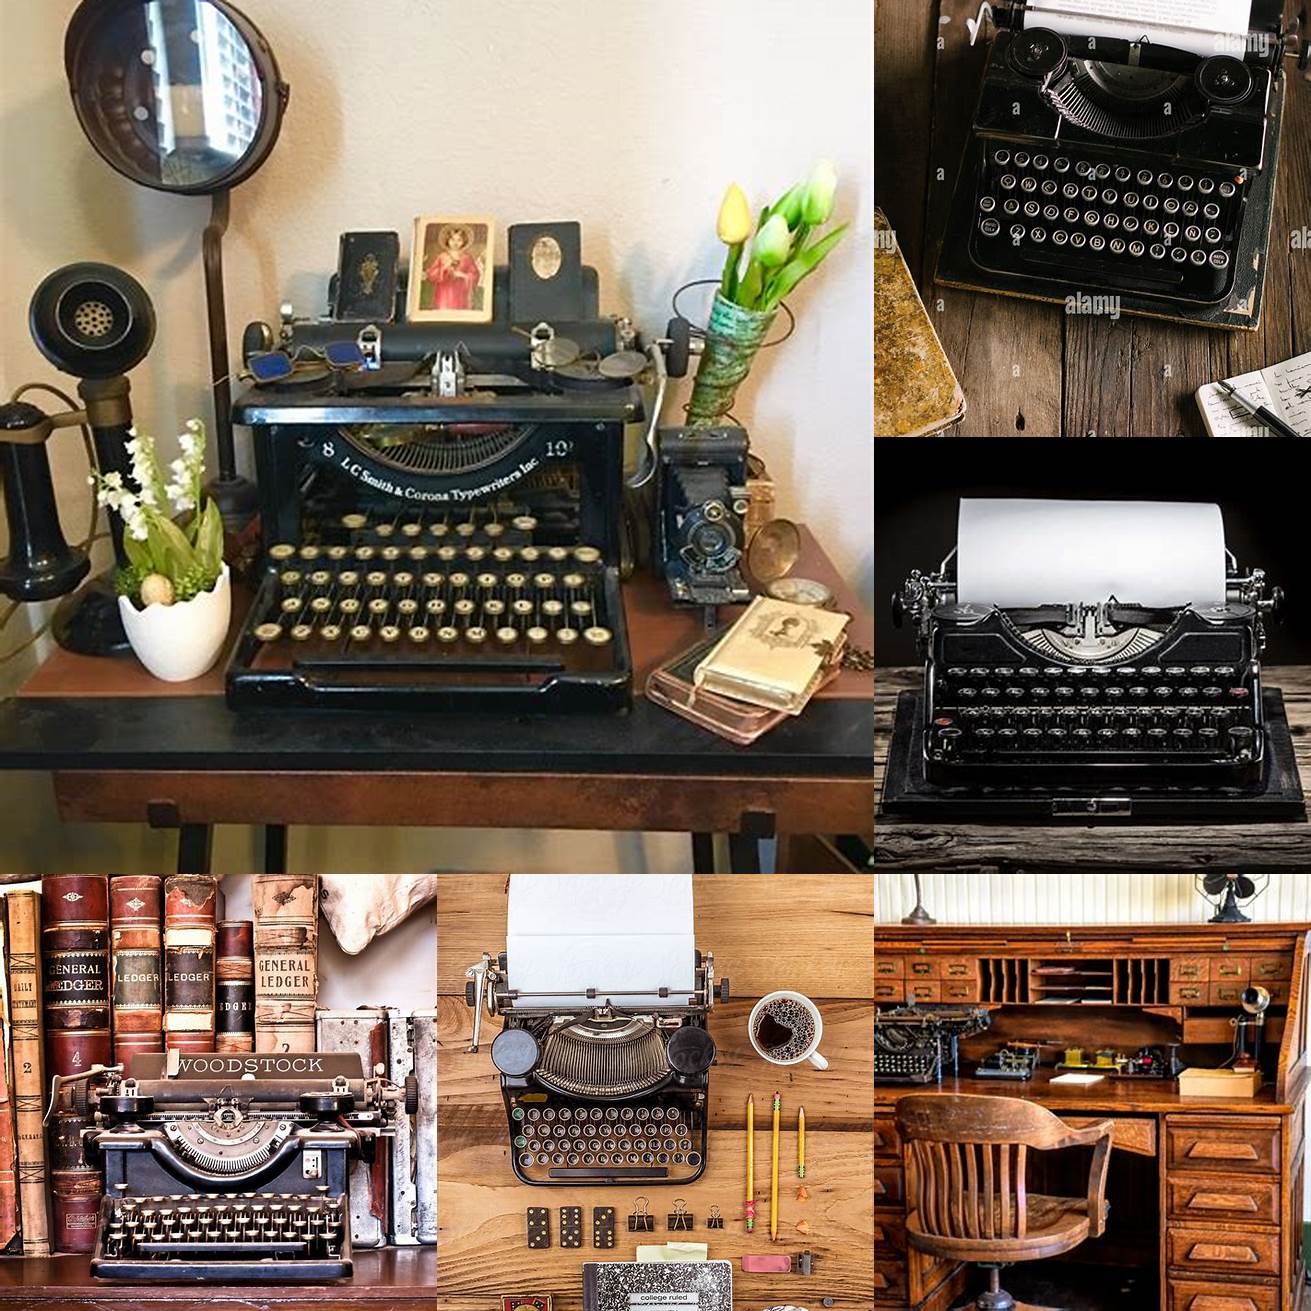 Image of a vintage-style desk with a typewriter and books